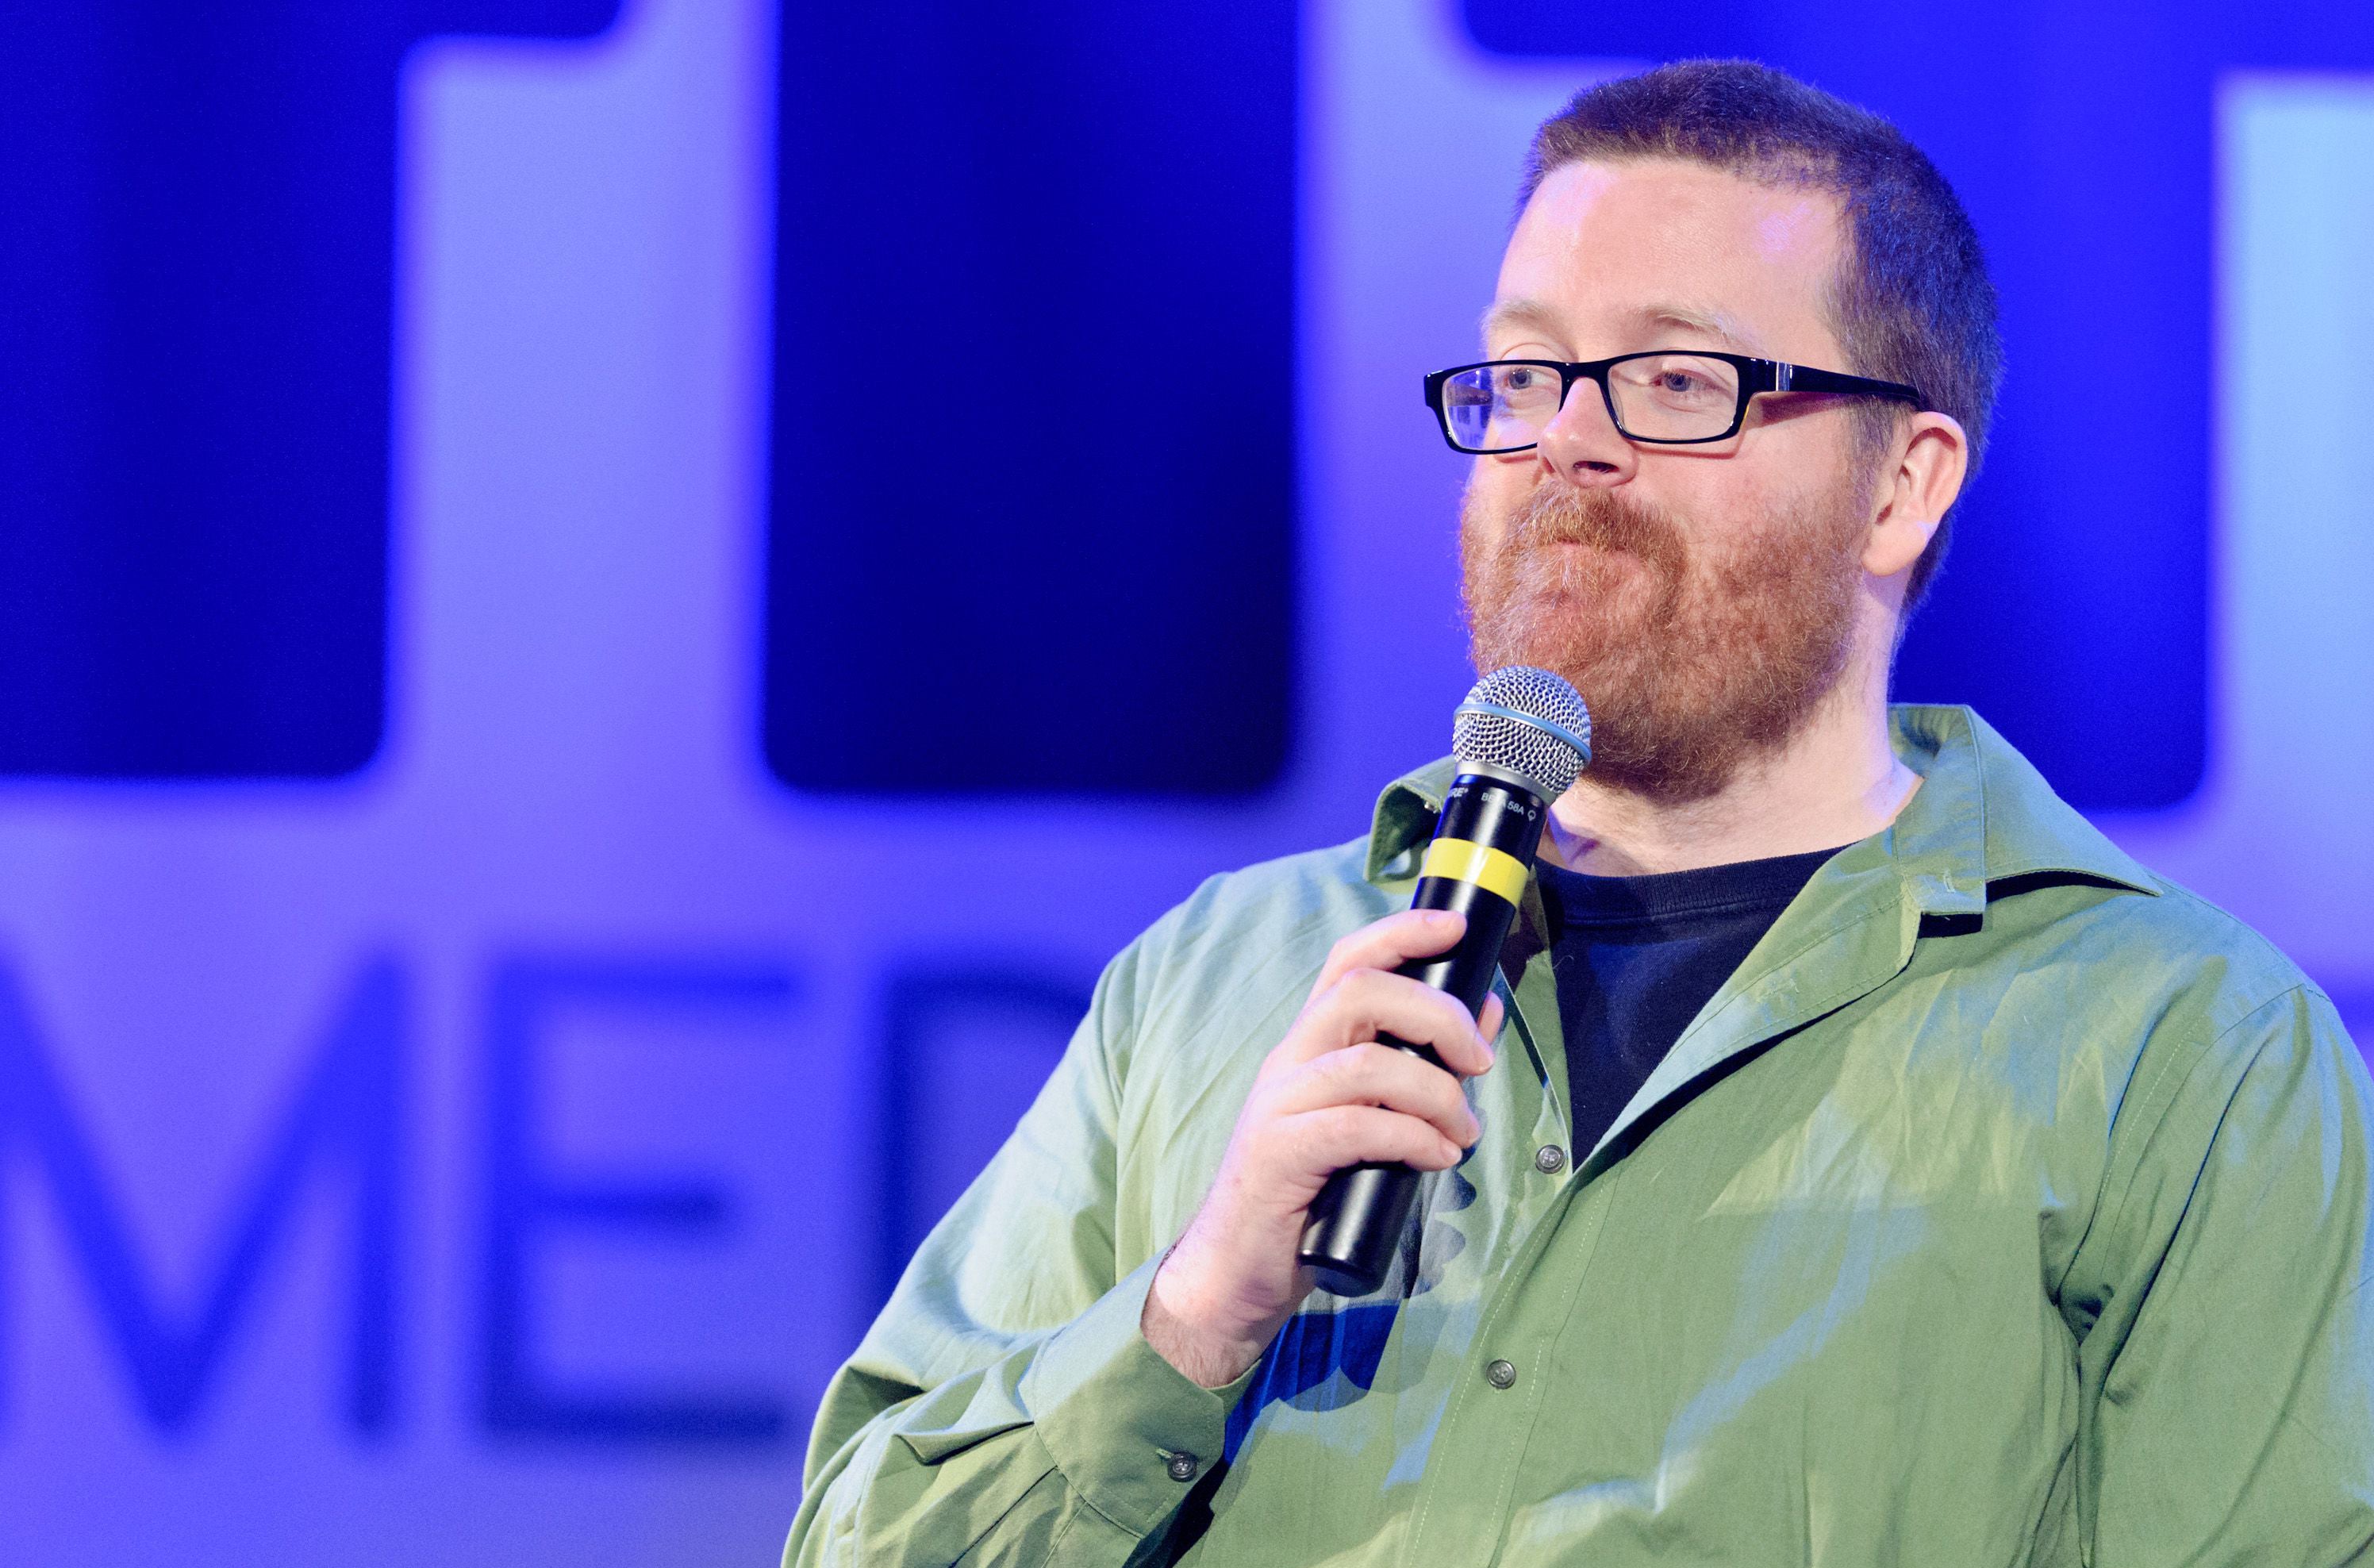 Frankie Boyle has called on the sacking of Jeremy Clarkson because the presenter is a "cultural tumour" he says